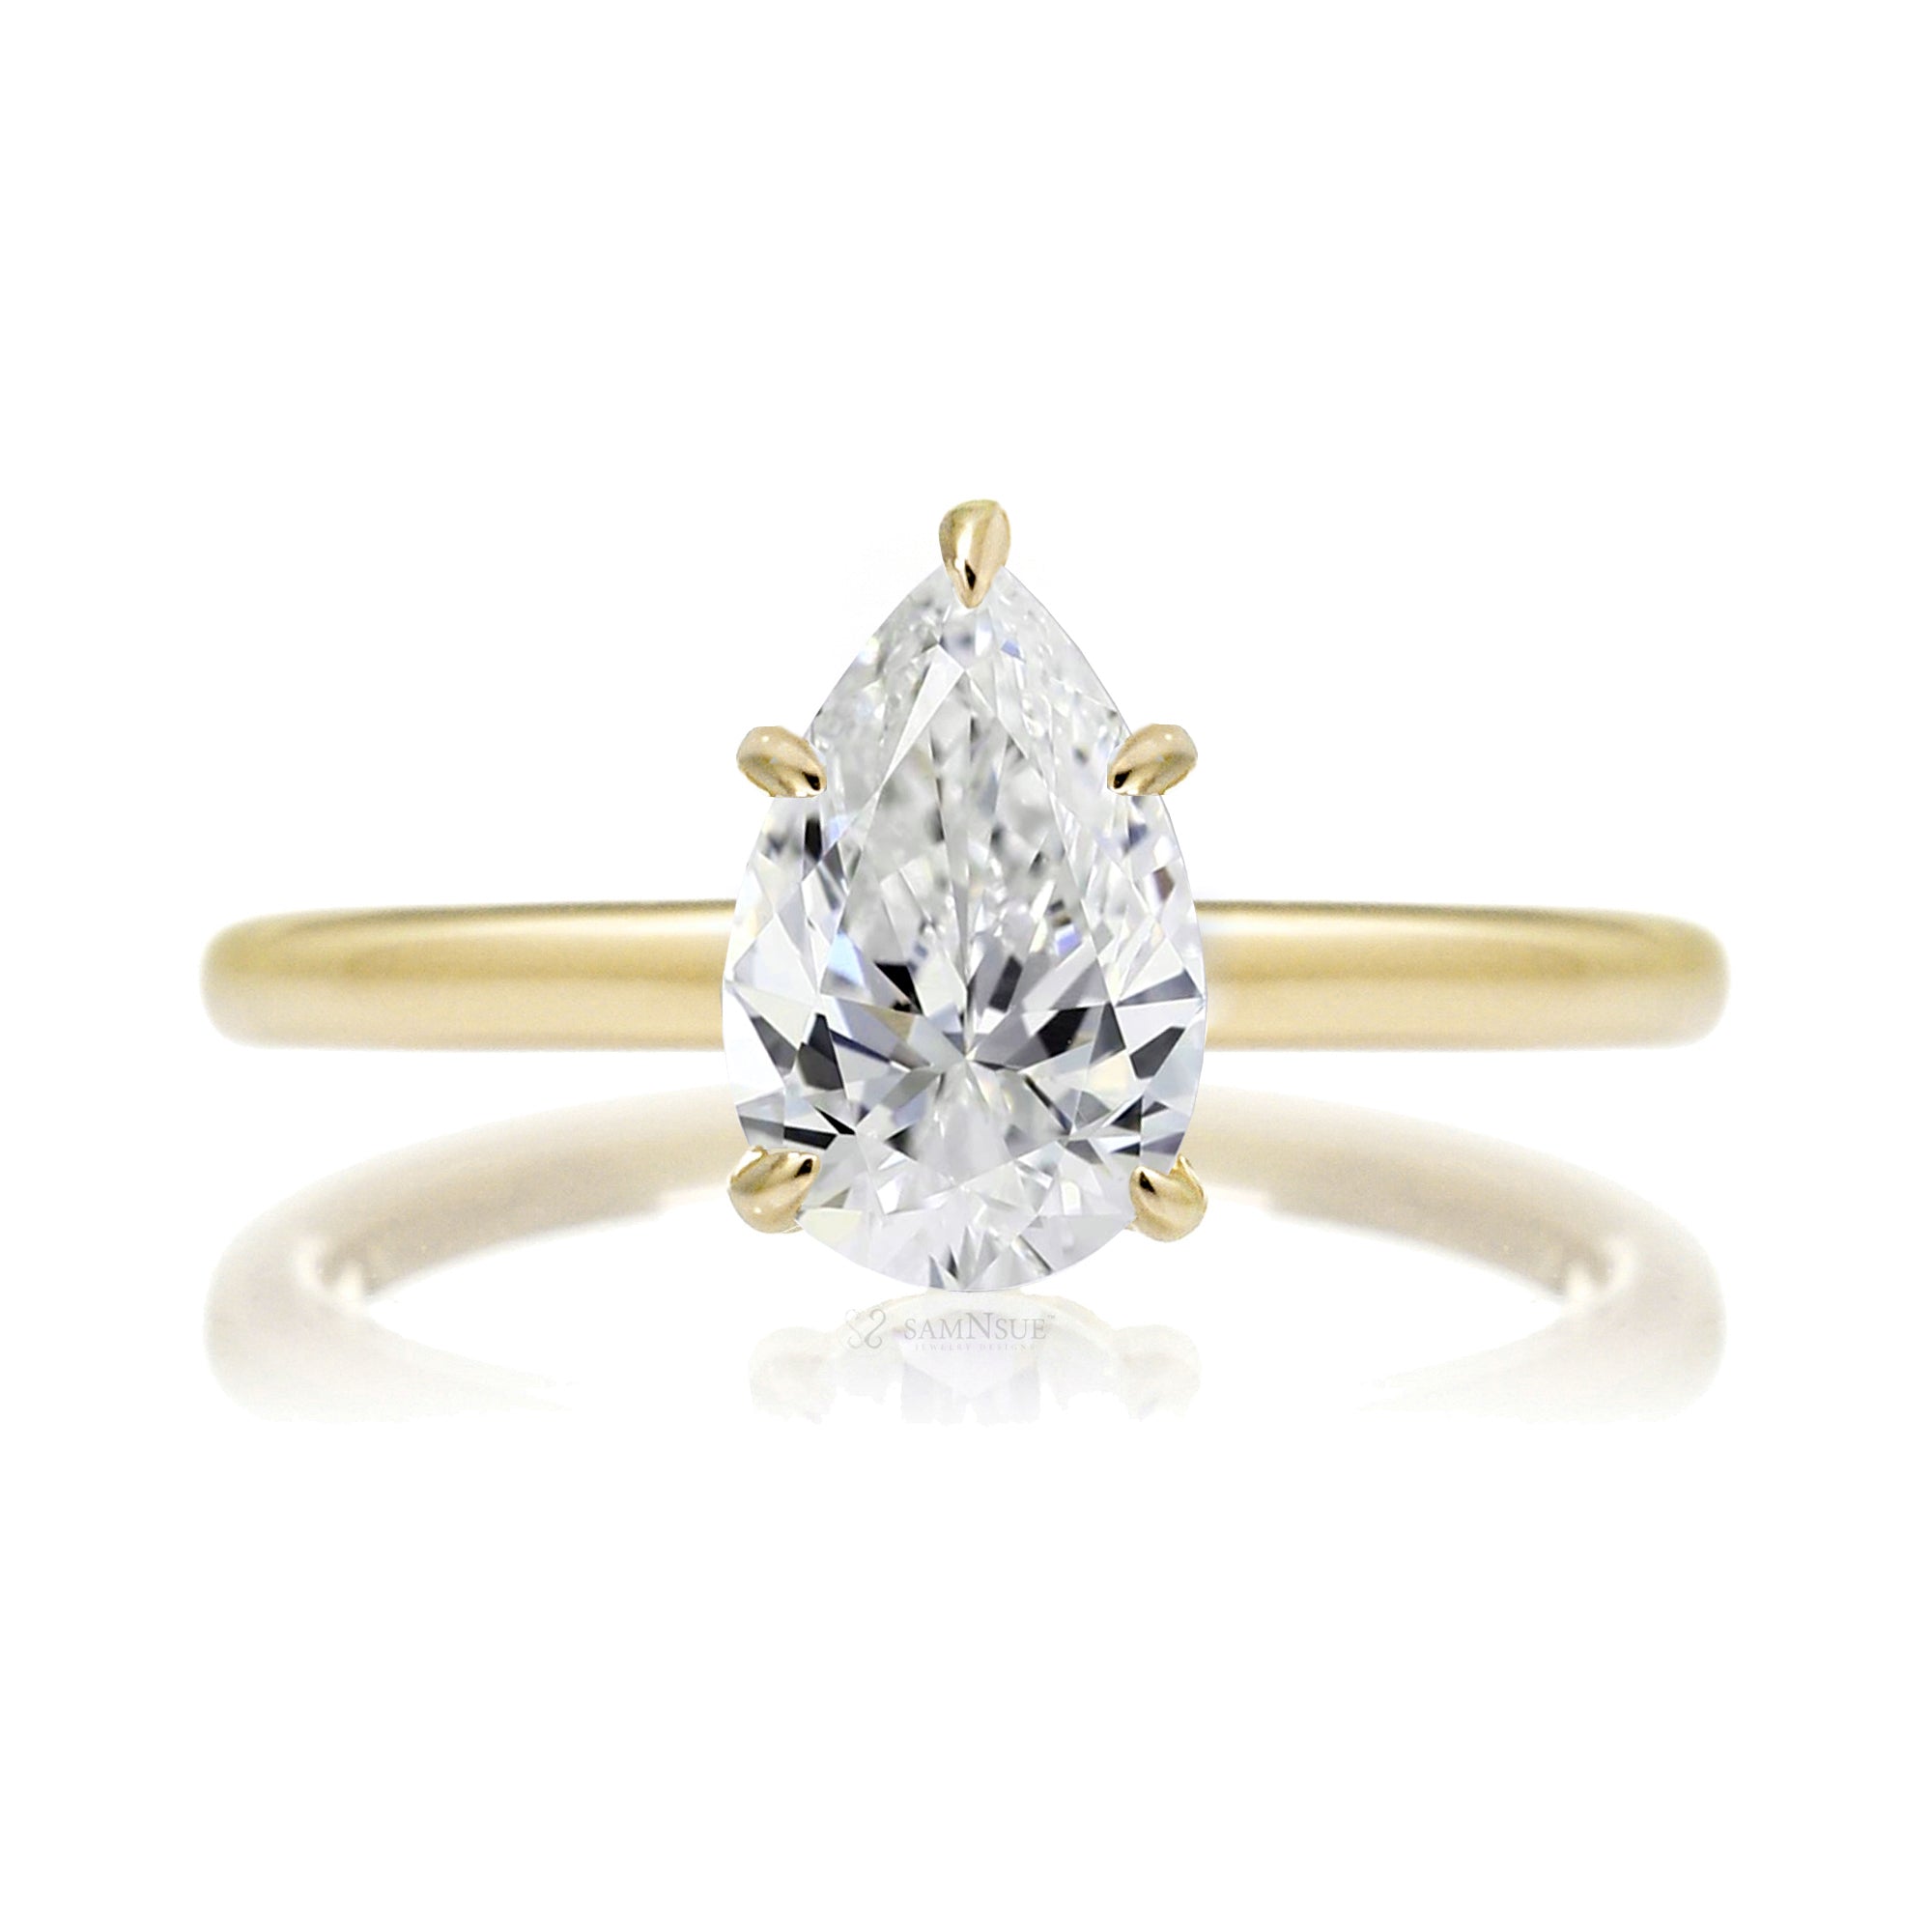 Pear cut solitaire diamond engagement ring with a hidden halo and solid polished band in yellow gold